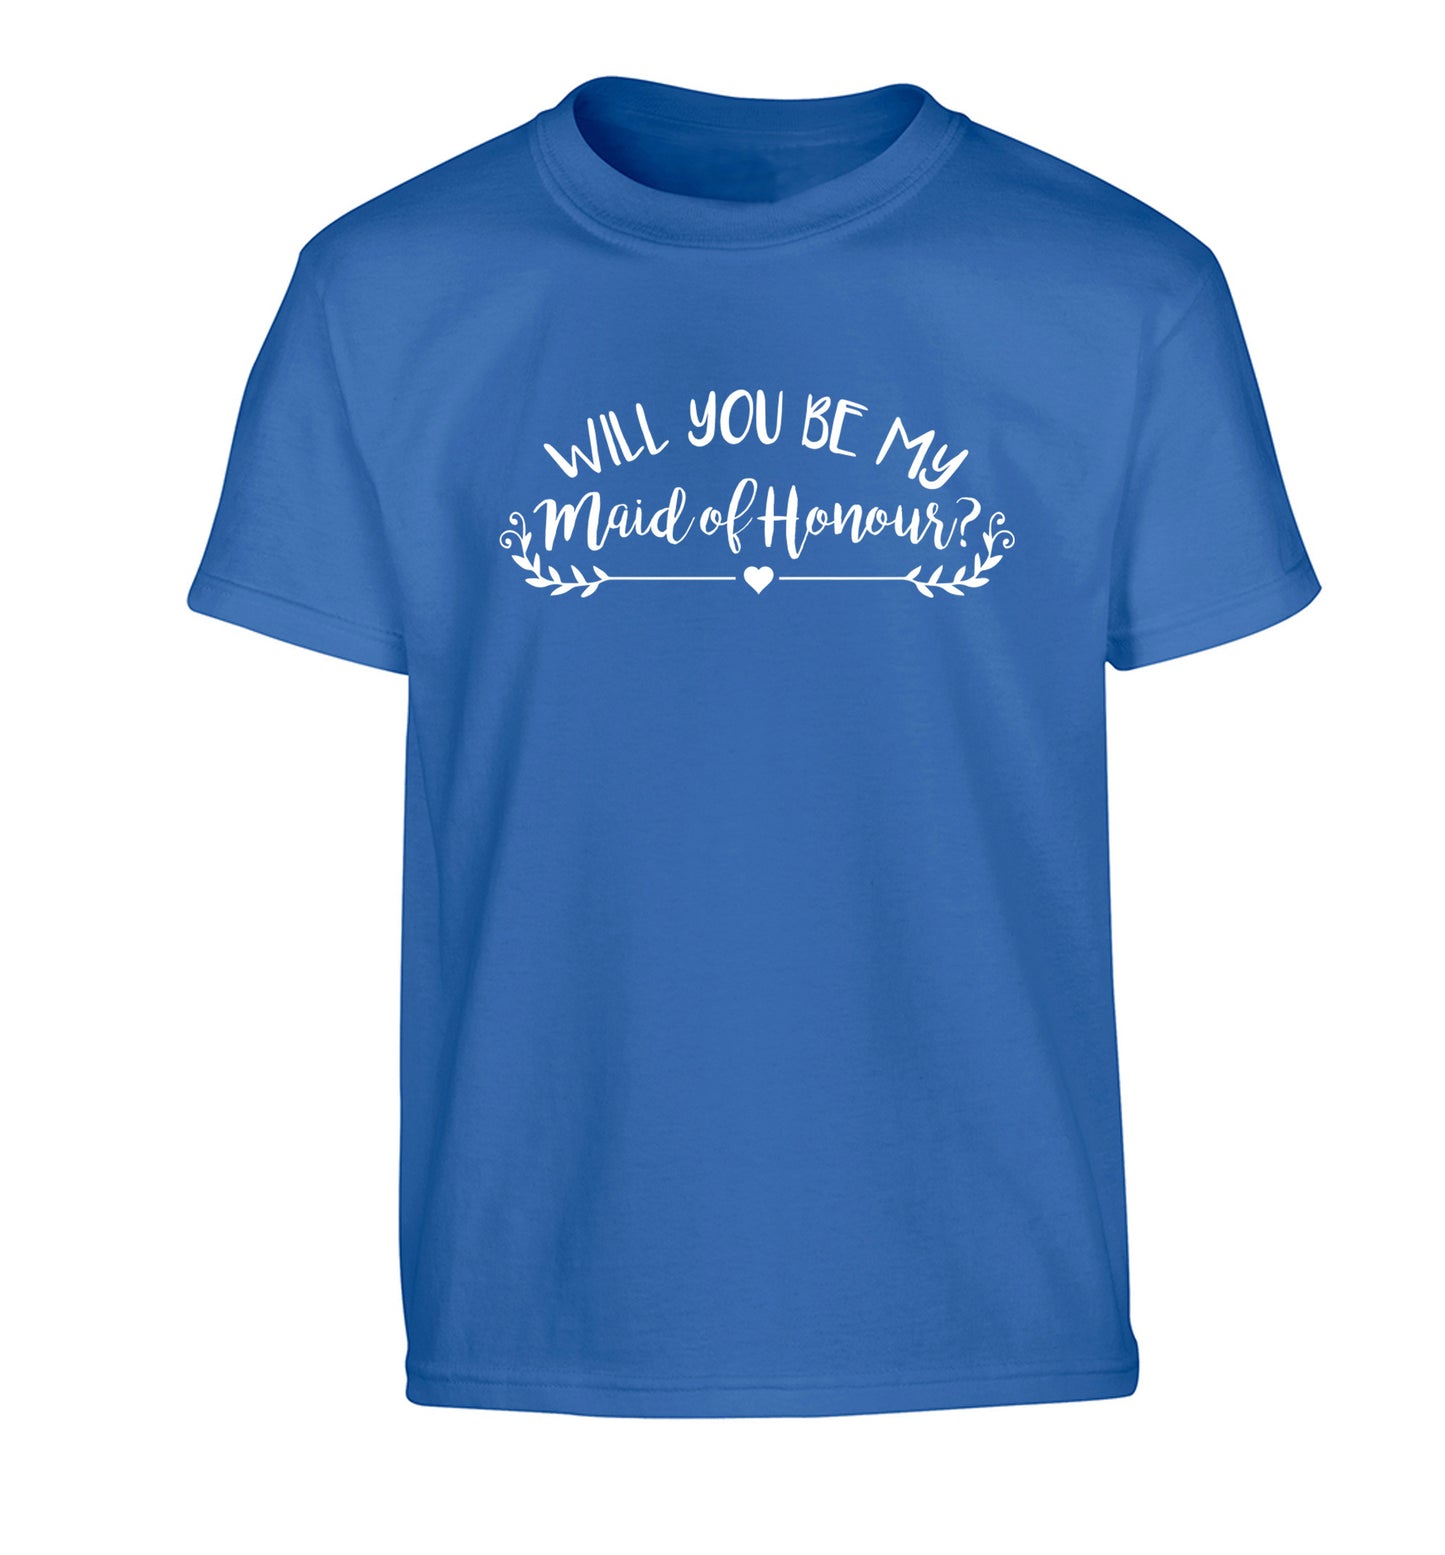 Will you be my maid of honour? Children's blue Tshirt 12-14 Years